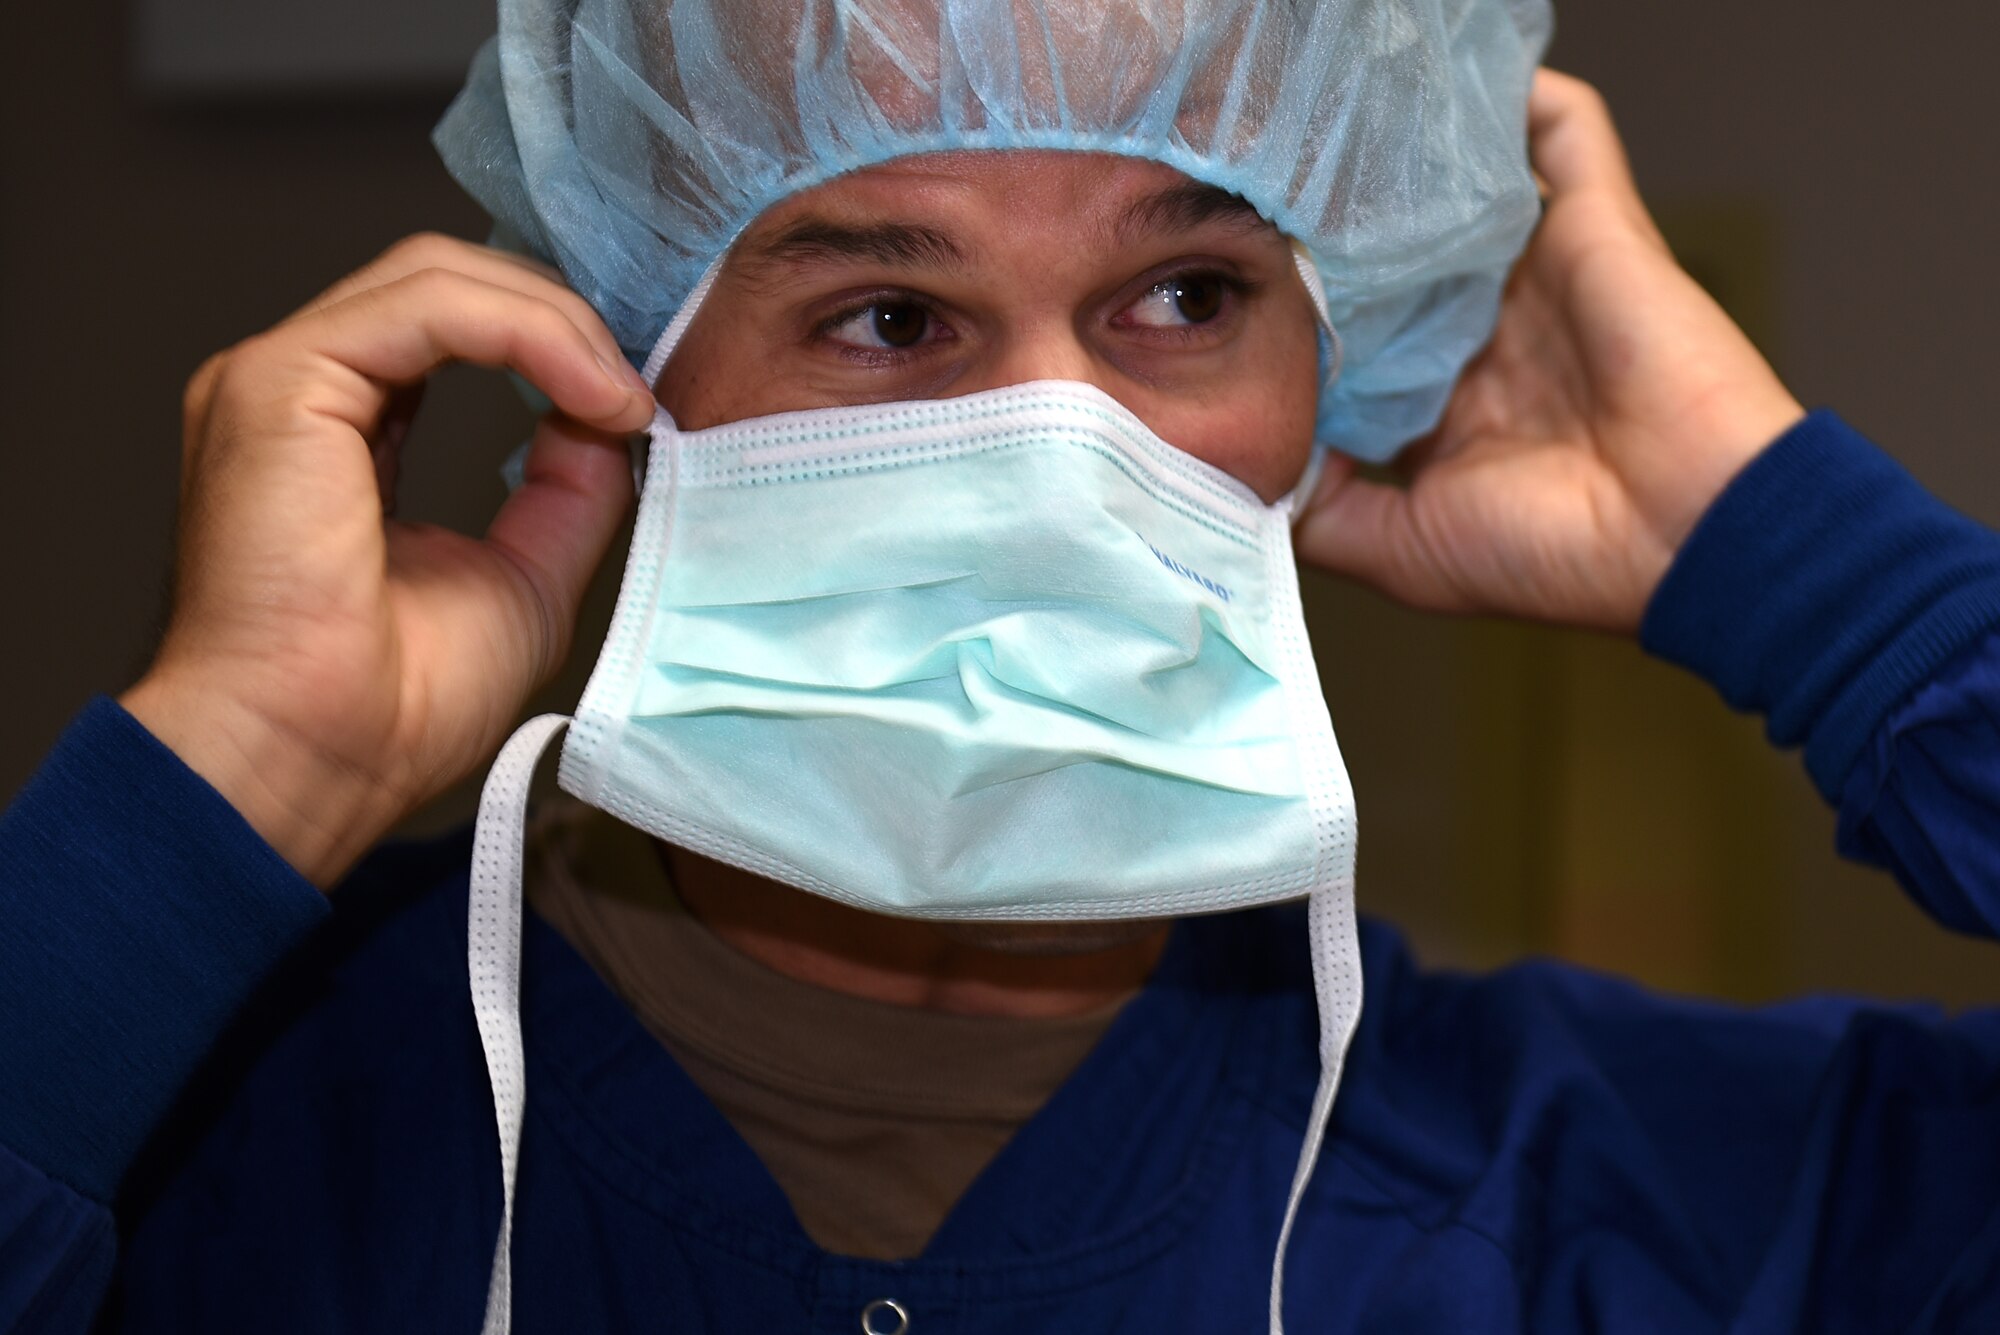 U.S. Air Force Col. Zachery Jiron, 60th Air Mobility Wing vice commander, dons a surgical mask to enter a sterile room in the operating facilities during a Leadership Rounds Aug. 8, 2019, at David Grant USAF Medical Center Travis Air Force Base, California. As part of the Leadership Rounds program, Jiron participated in a simulated surgery to get a firsthand experience of all the precautions medical staff take before every surgery. (U.S. Air Force photo by Airman 1st Class Cameron Otte)